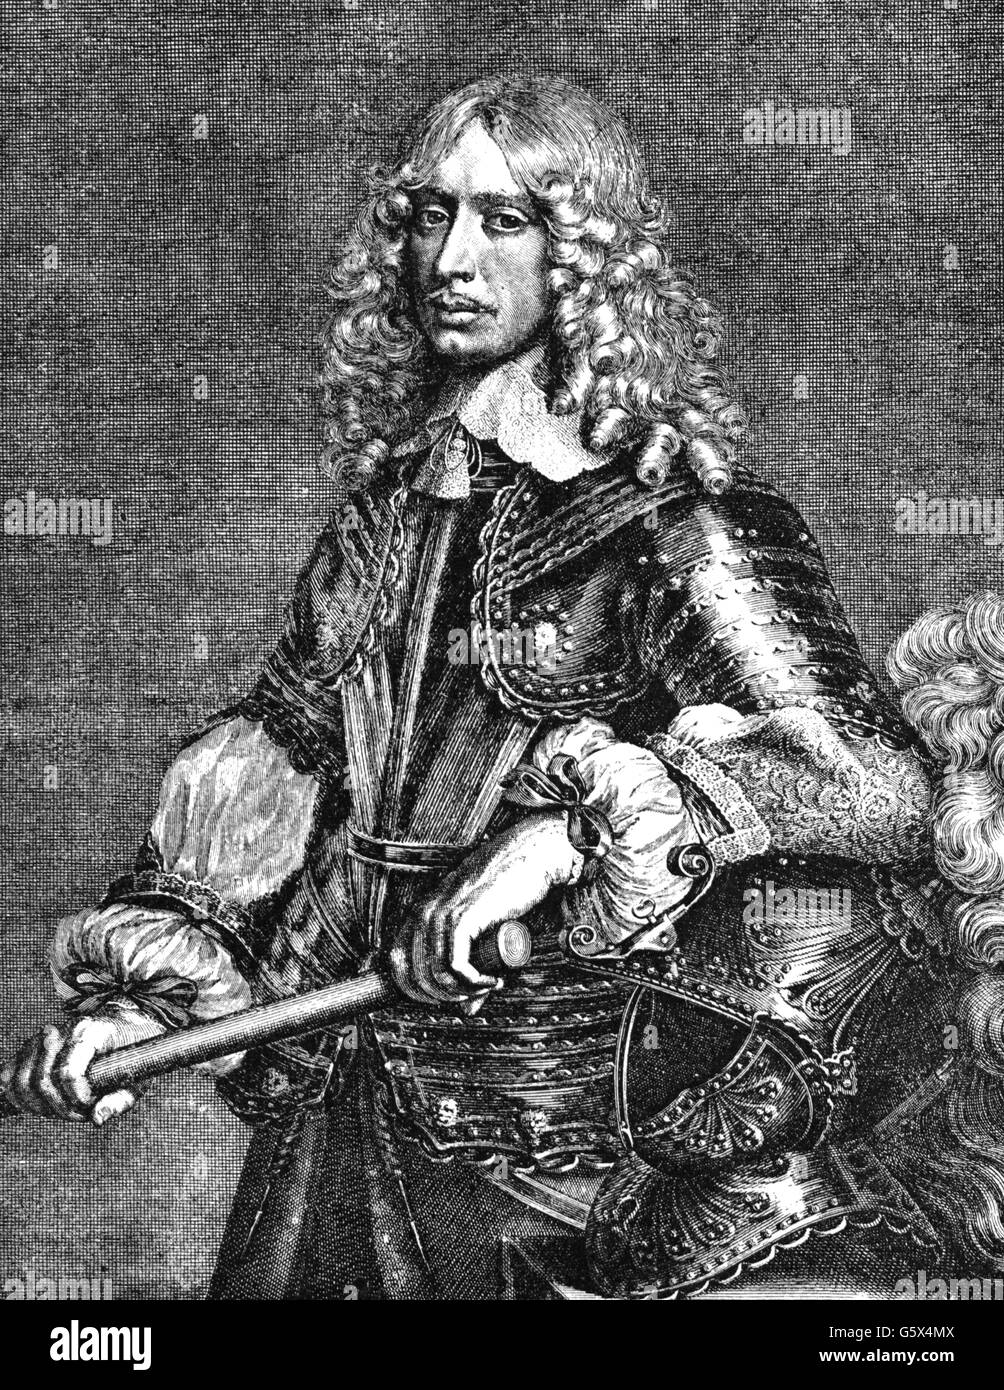 Vendome, Francois de, 16.1.1616 - 25.6.1669, Duke of Beaufort, French general, half length, copper engraving, 1651, Artist's Copyright has not to be cleared Stock Photo